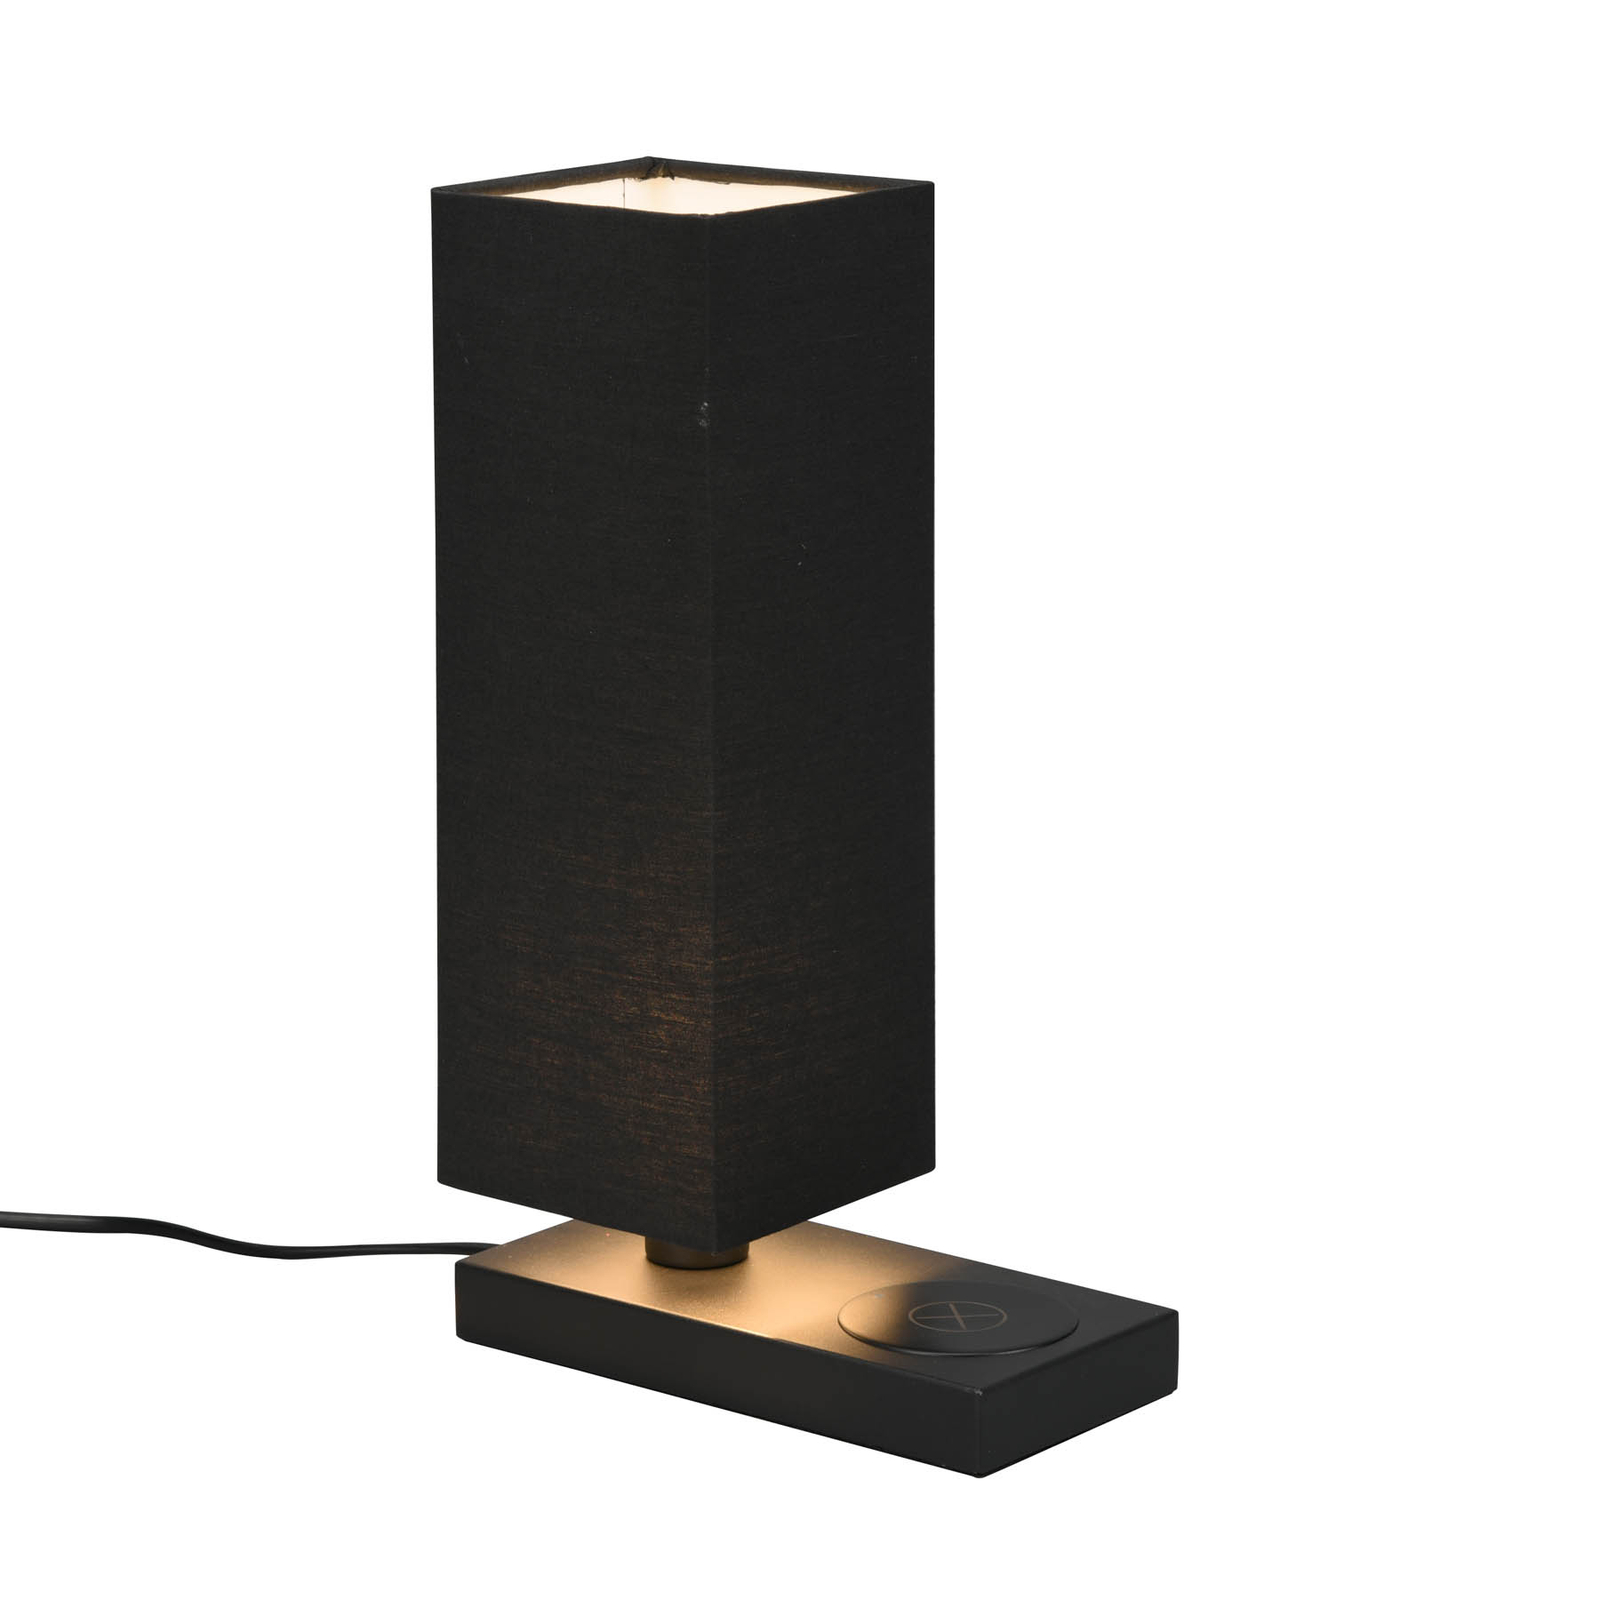 Haley table lamp with a charging station, black